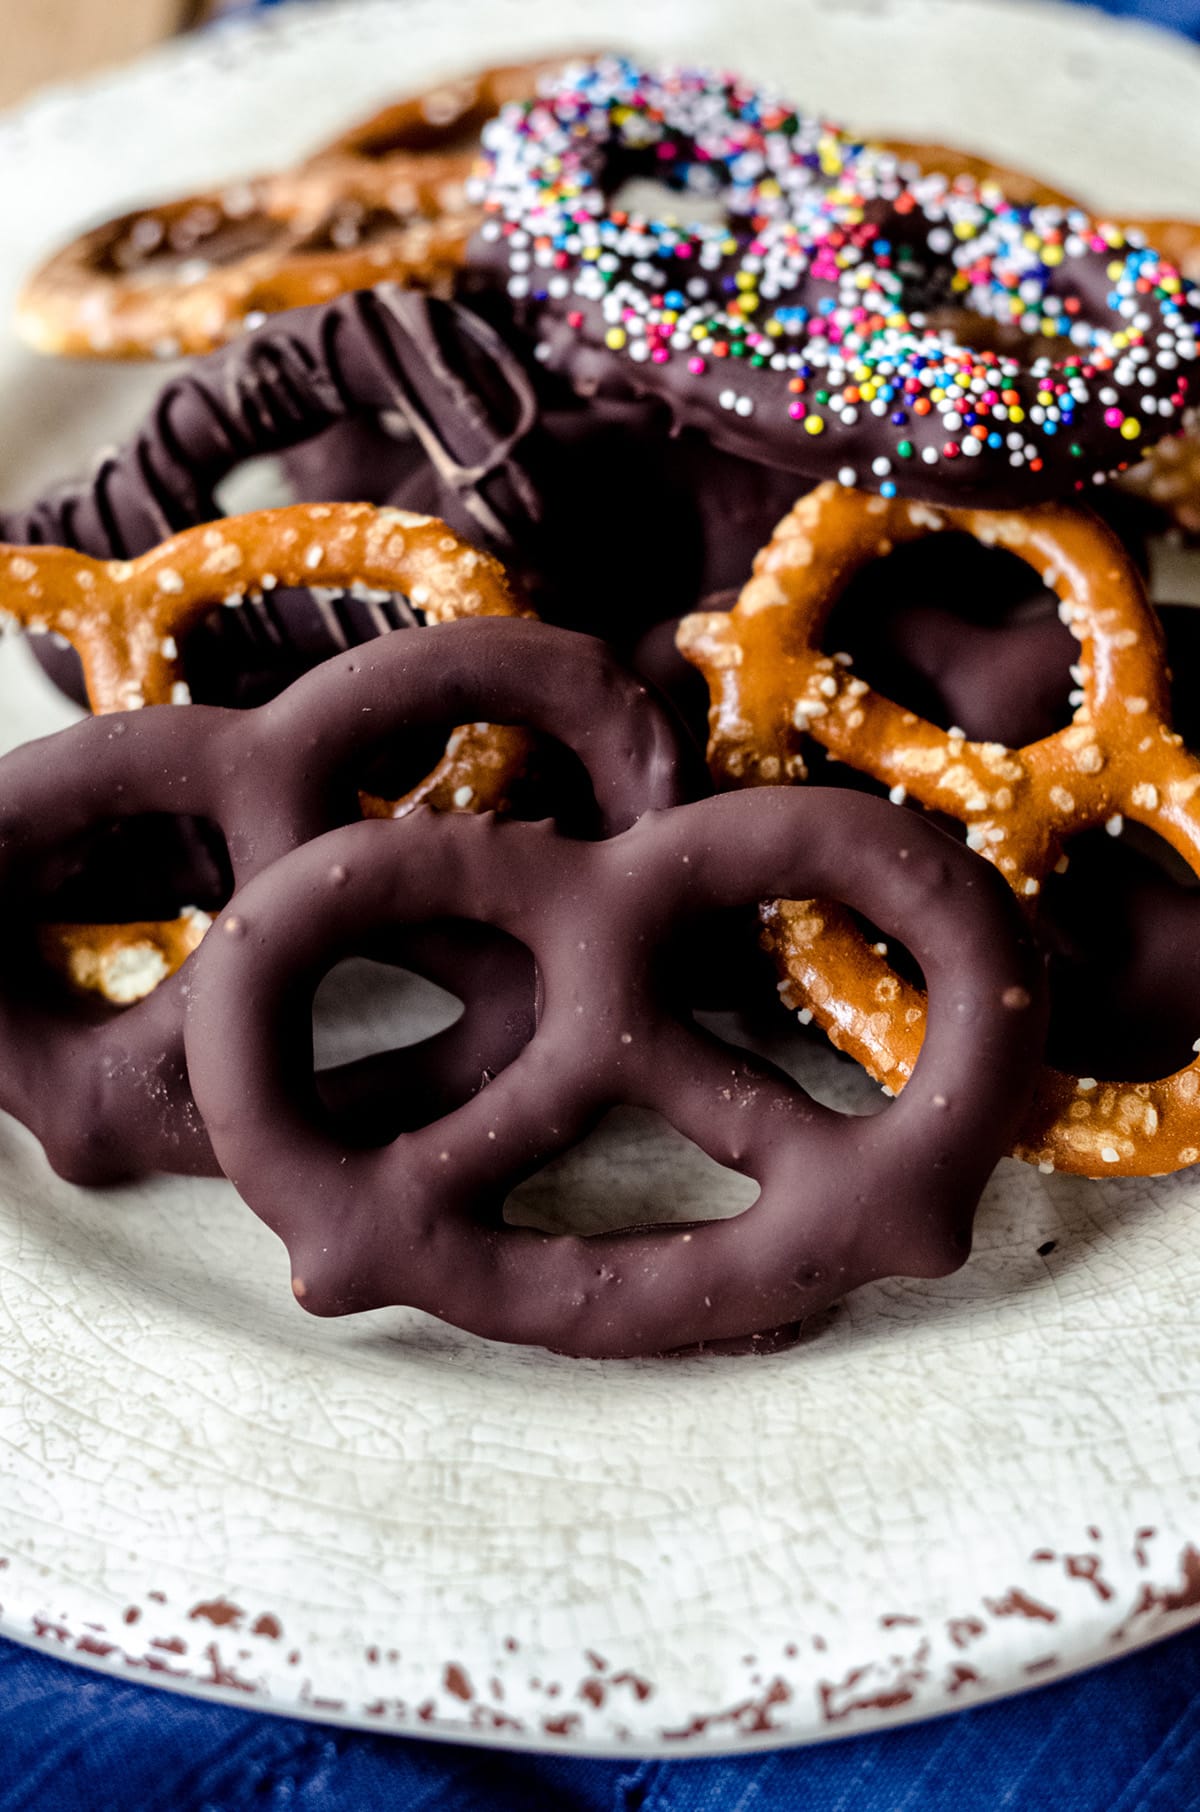 homemade chocolate covered pretzels on a plate